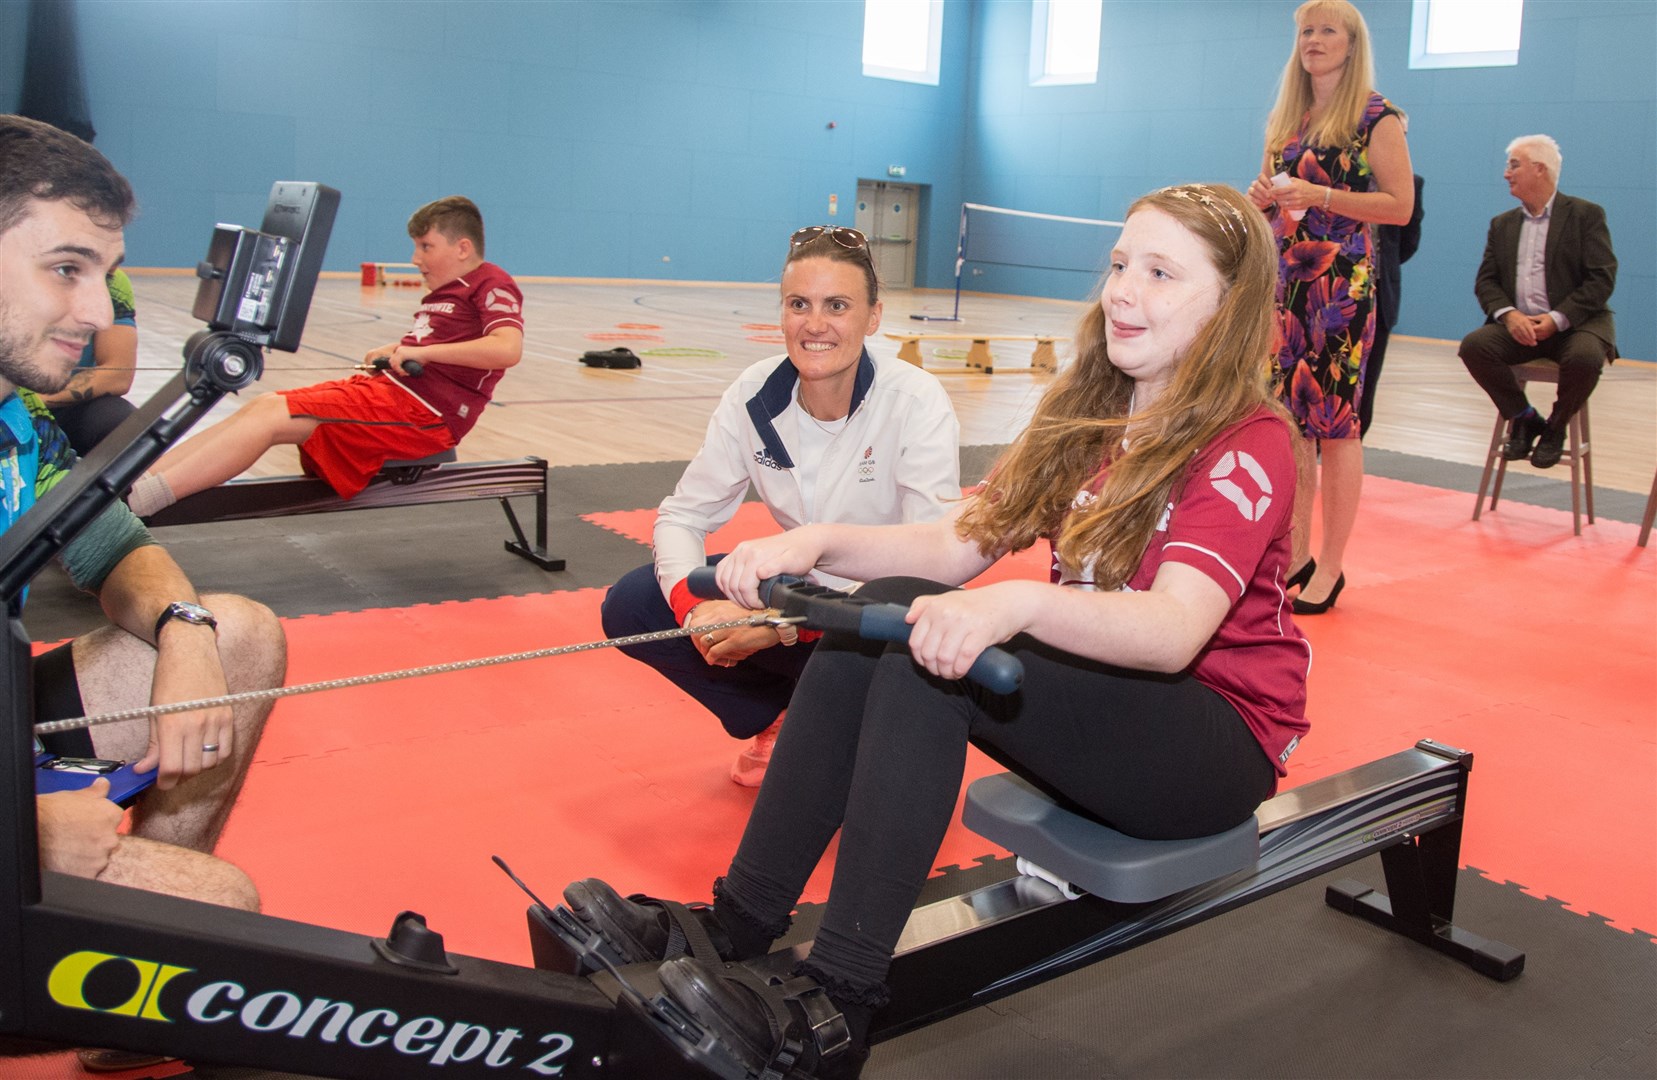 Millie Anderson, of Mosstowie Primary, takes on the rowing challenge as Heather Stanning looks on. Picture: Becky Saunderson. Image No.044669.